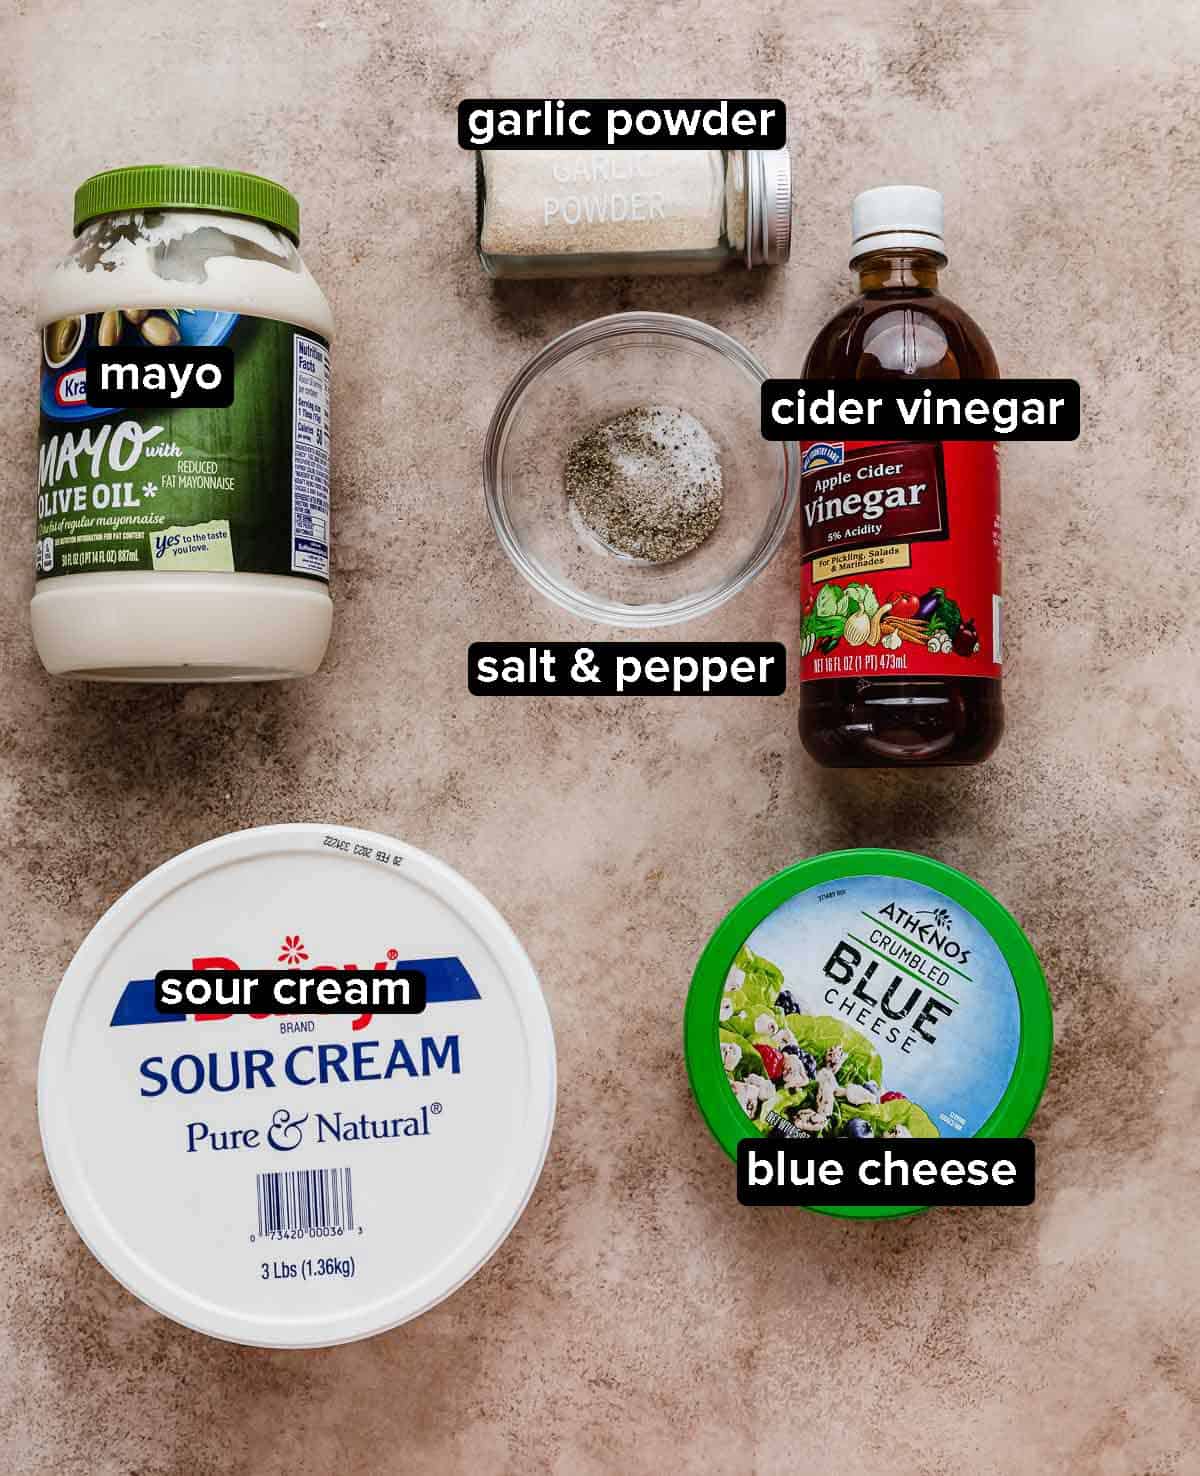 Blue cheese dressing ingredients (used to make a blue cheese sauce) to serve with Buffalo Chicken Bites.